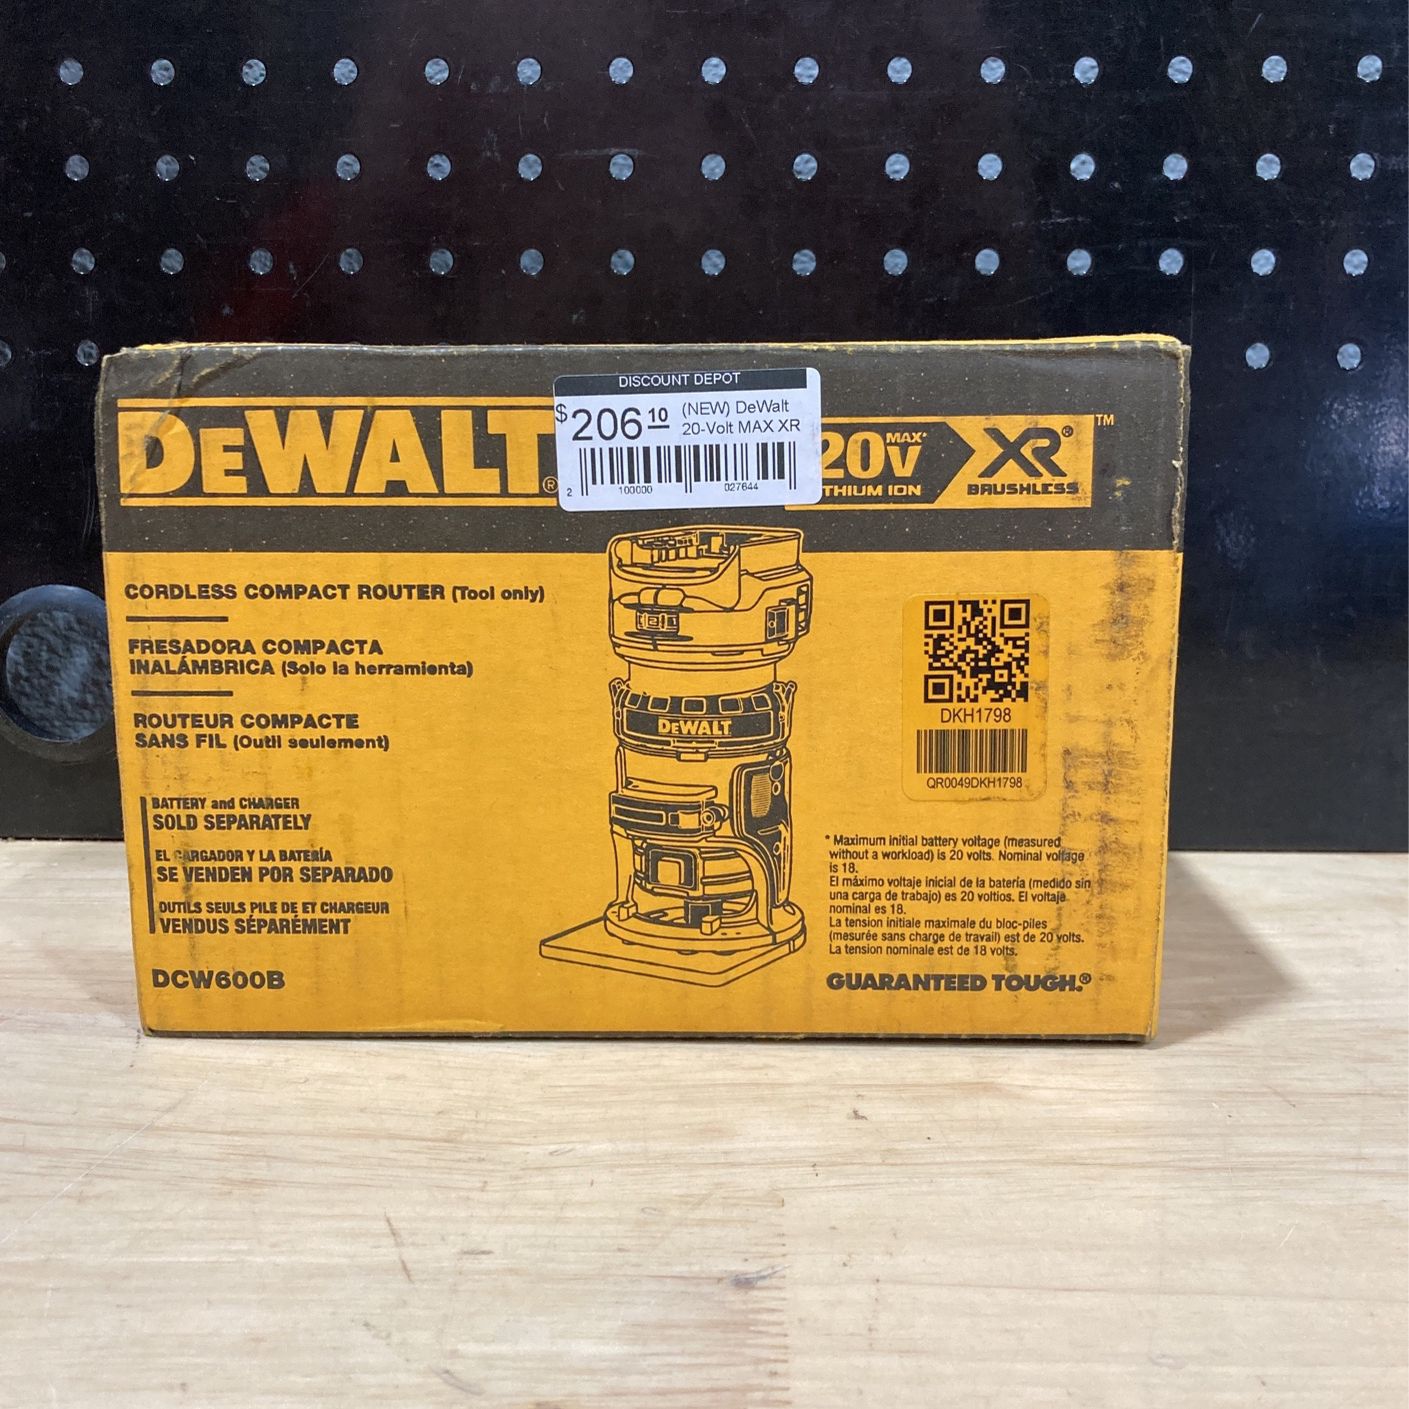 DEWALT 20V MAX XR Cordless Brushless Fixed Base Compact Router (Tool Only)  for Sale in Phoenix, AZ OfferUp